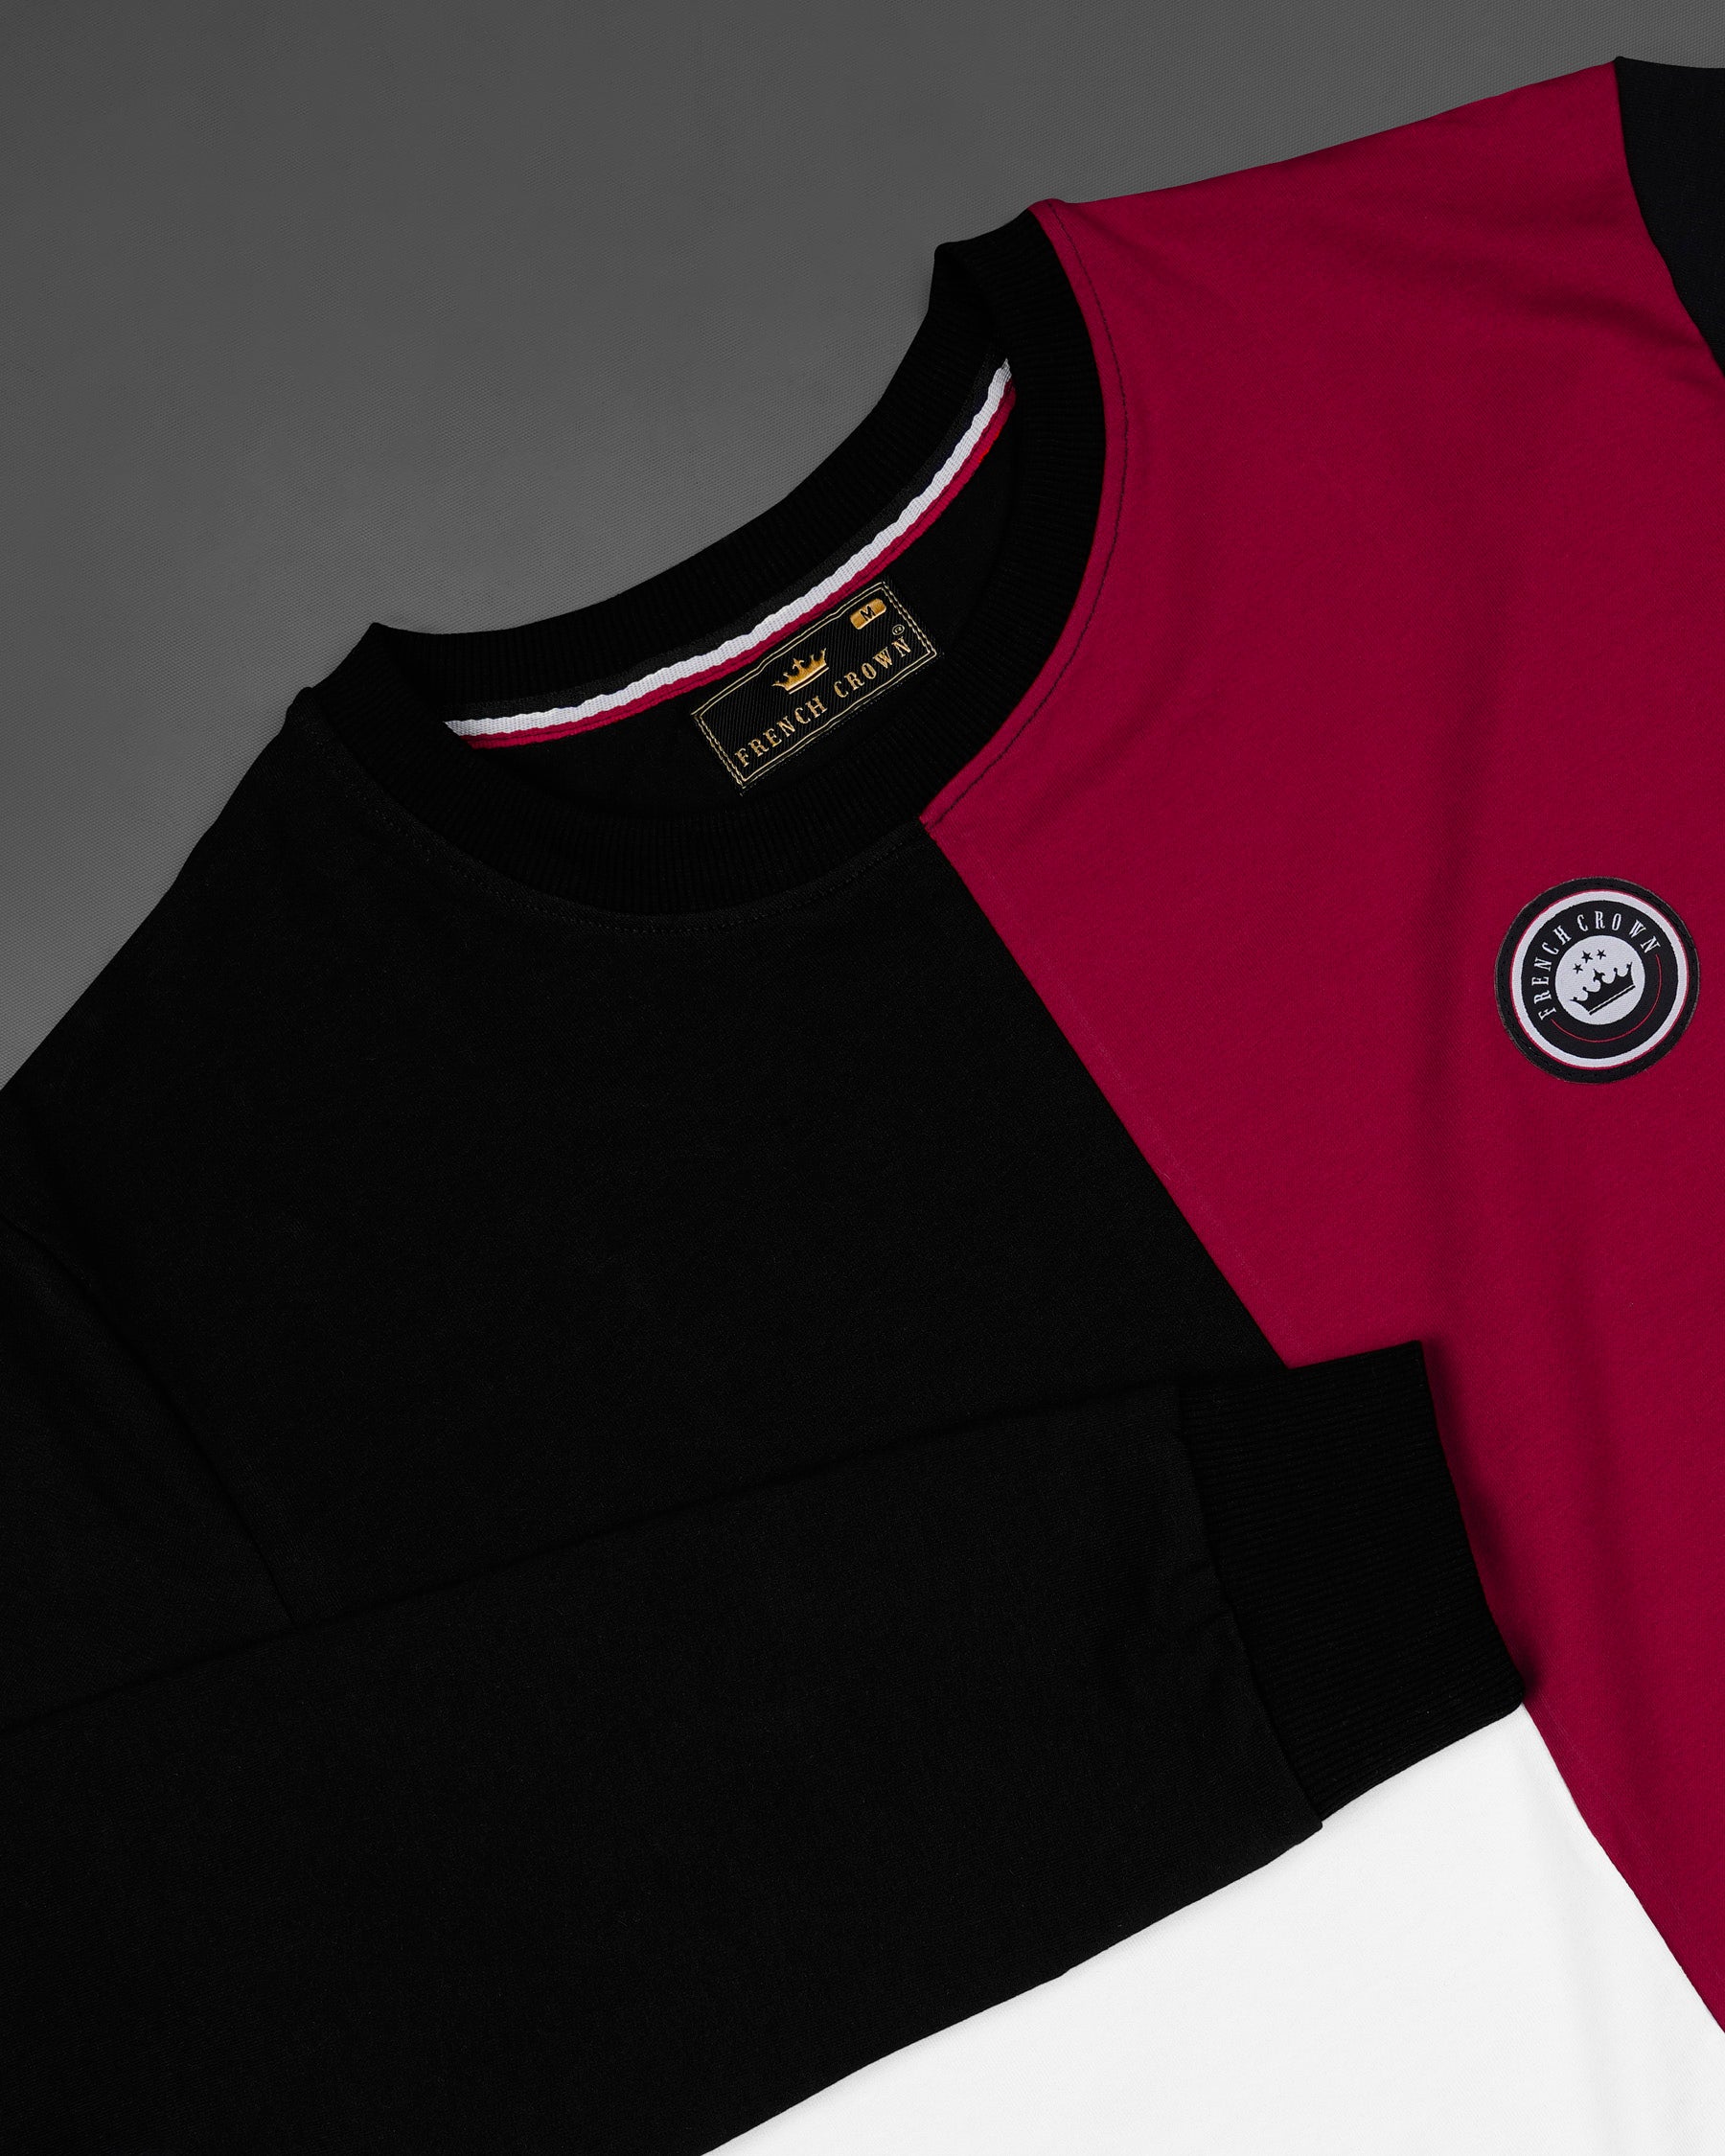 Jade Black with Bright White and Merlot Red Sweatshirt TS595-S, TS595-M, TS595-L, TS595-XL, TS595-XXL, TS595-3XL, TS595-4XL